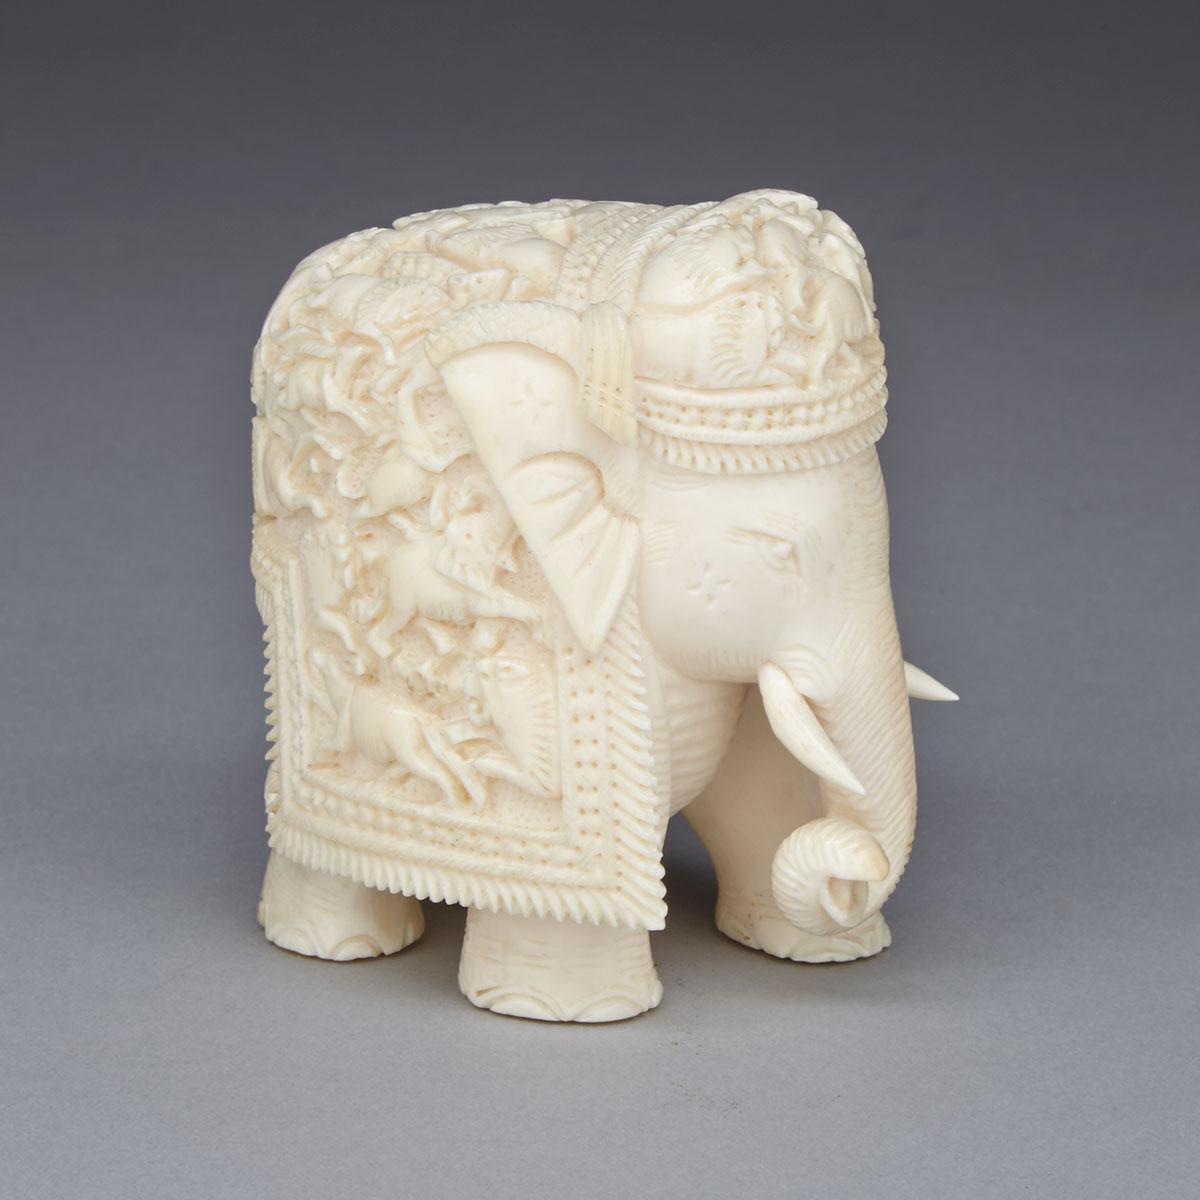 East Indian Carved Ivory Model of an Elephant, early 20th century